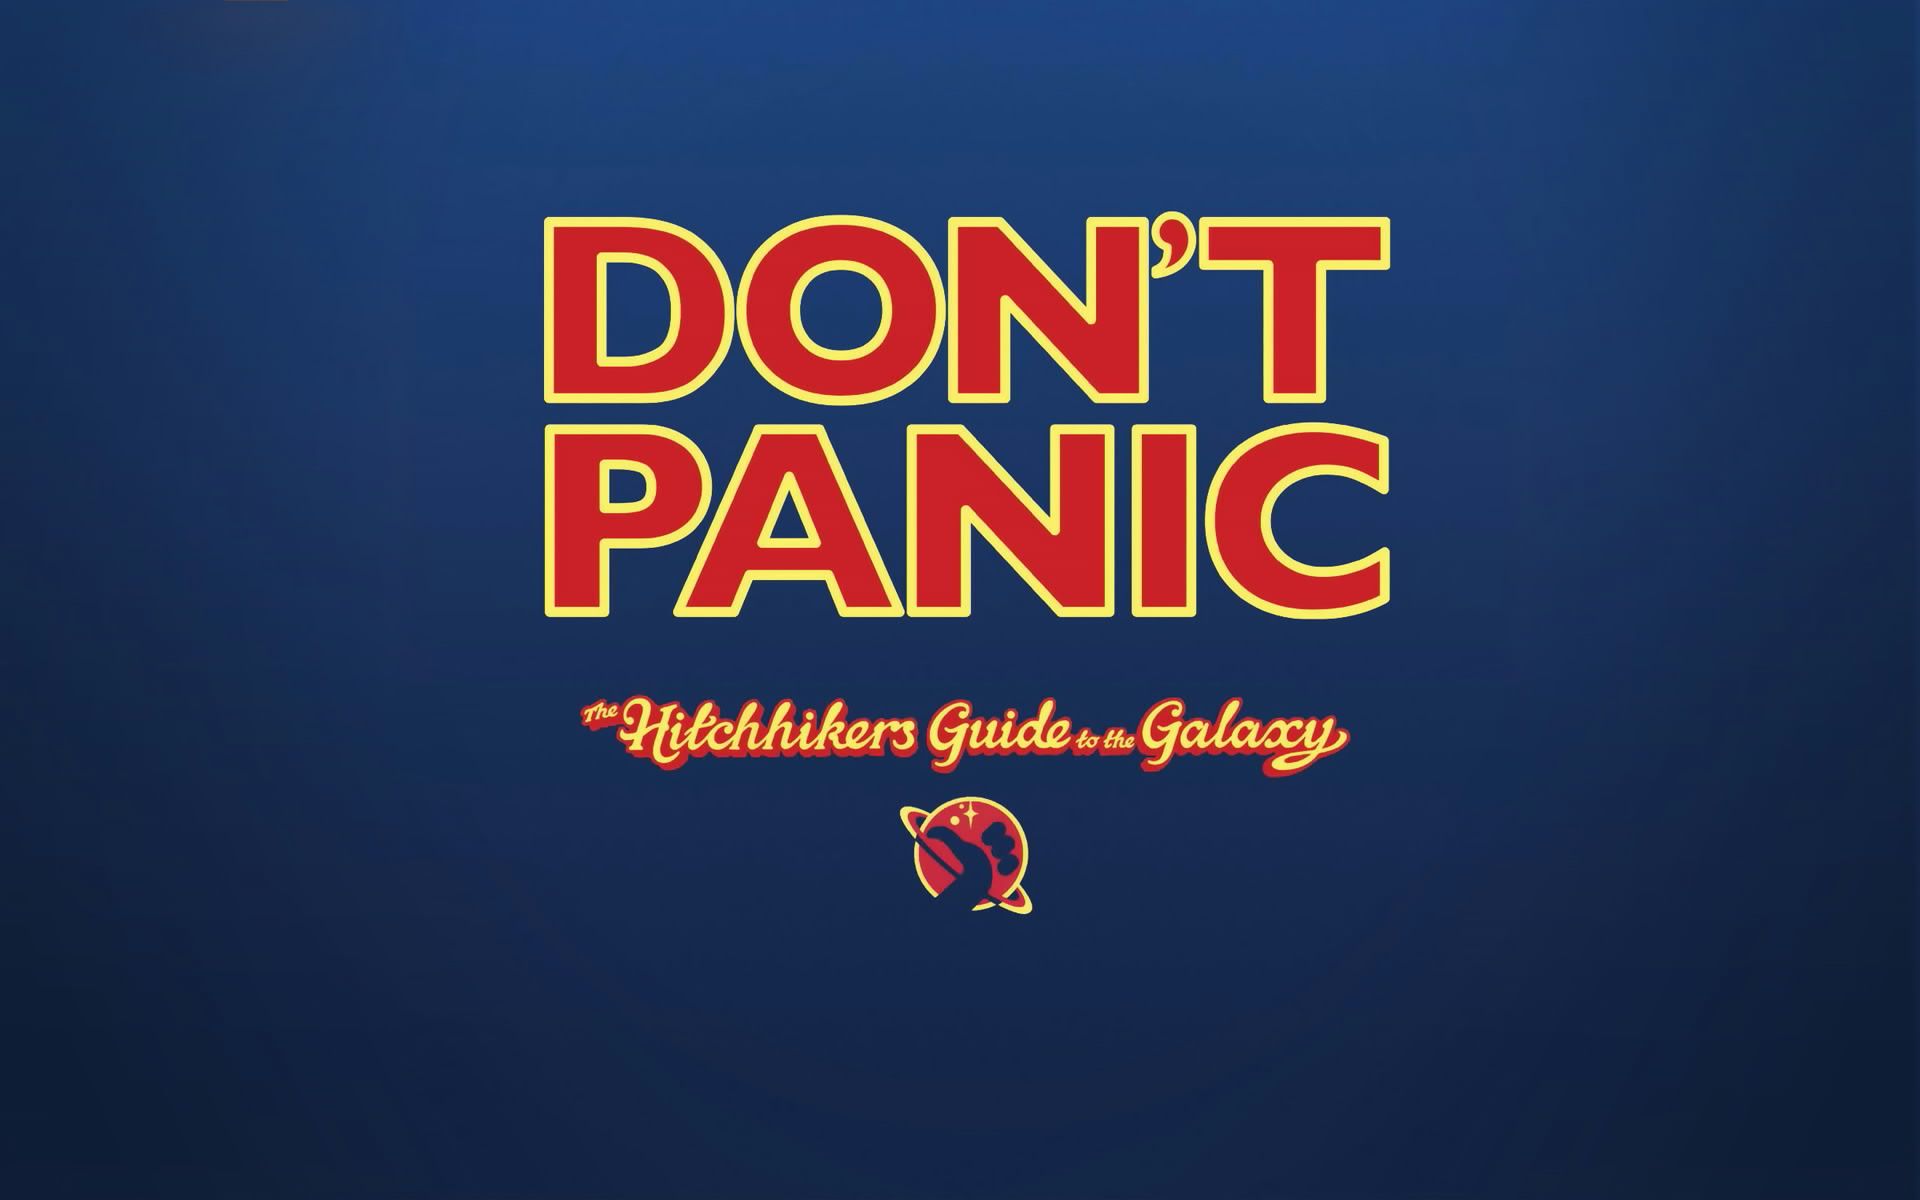 The hitchhikers guide to the galaxy dont panic wallpaper